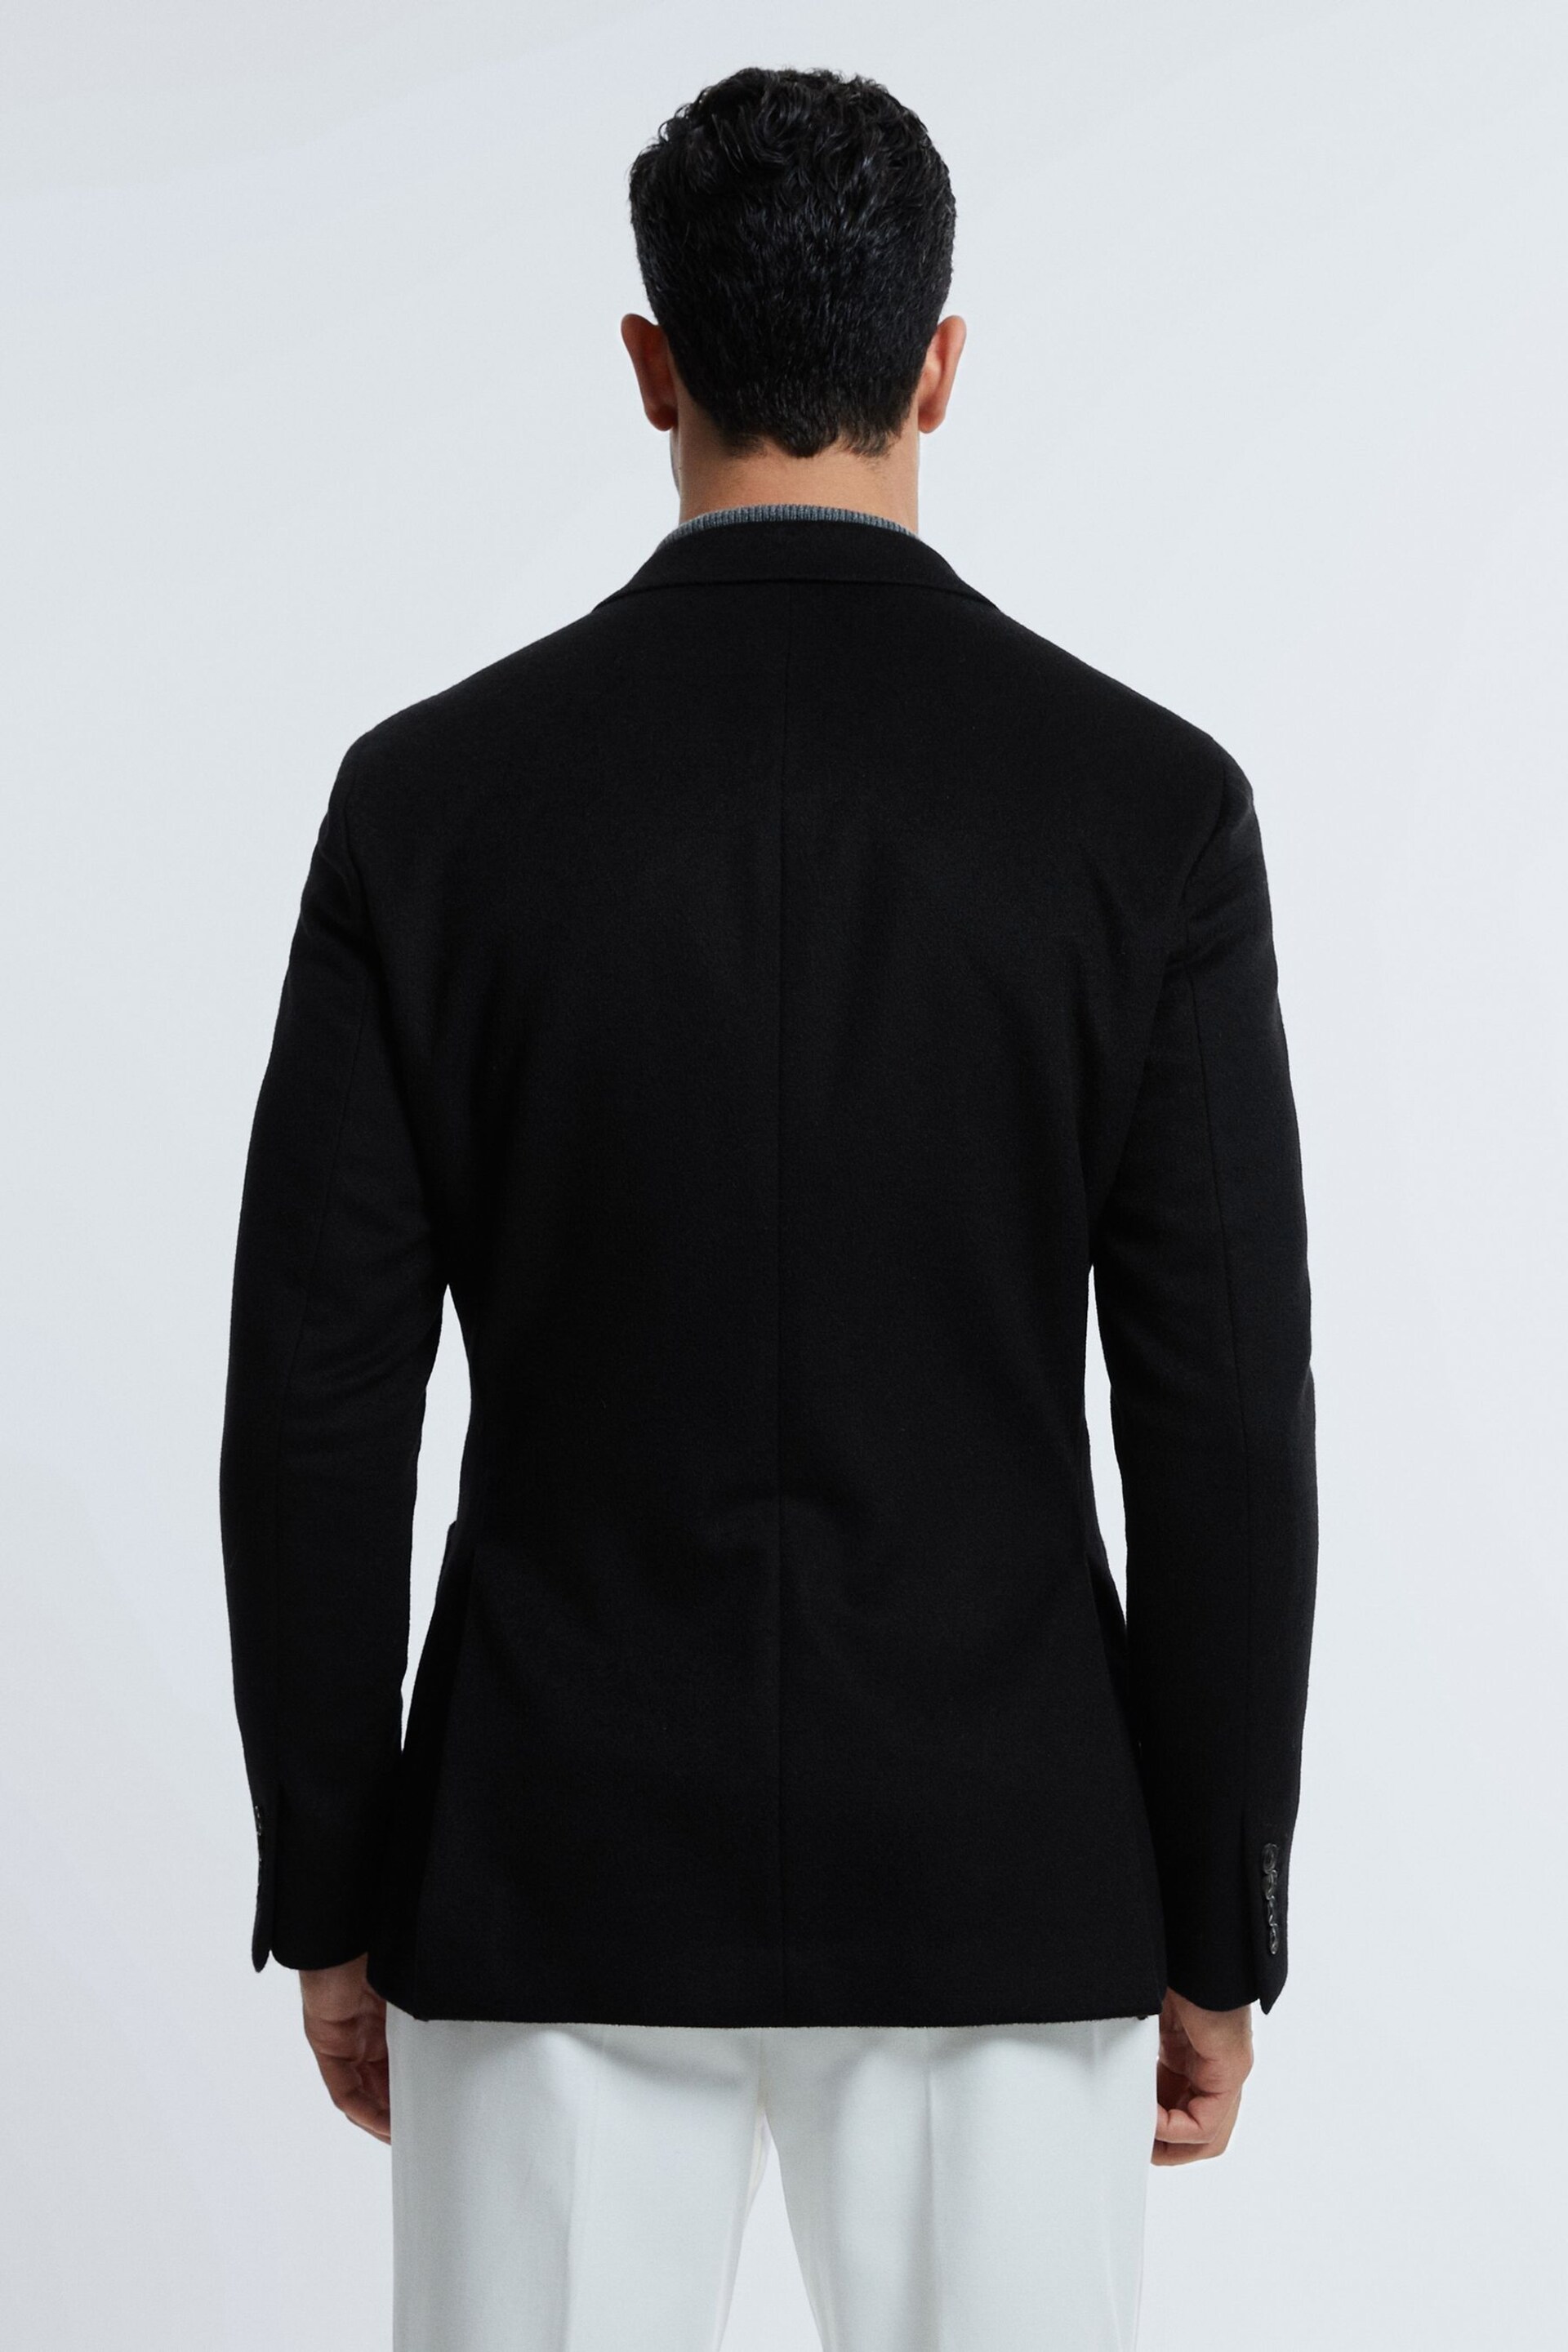 Atelier Cashmere Modern Fit Double Breasted Blazer - Image 5 of 7